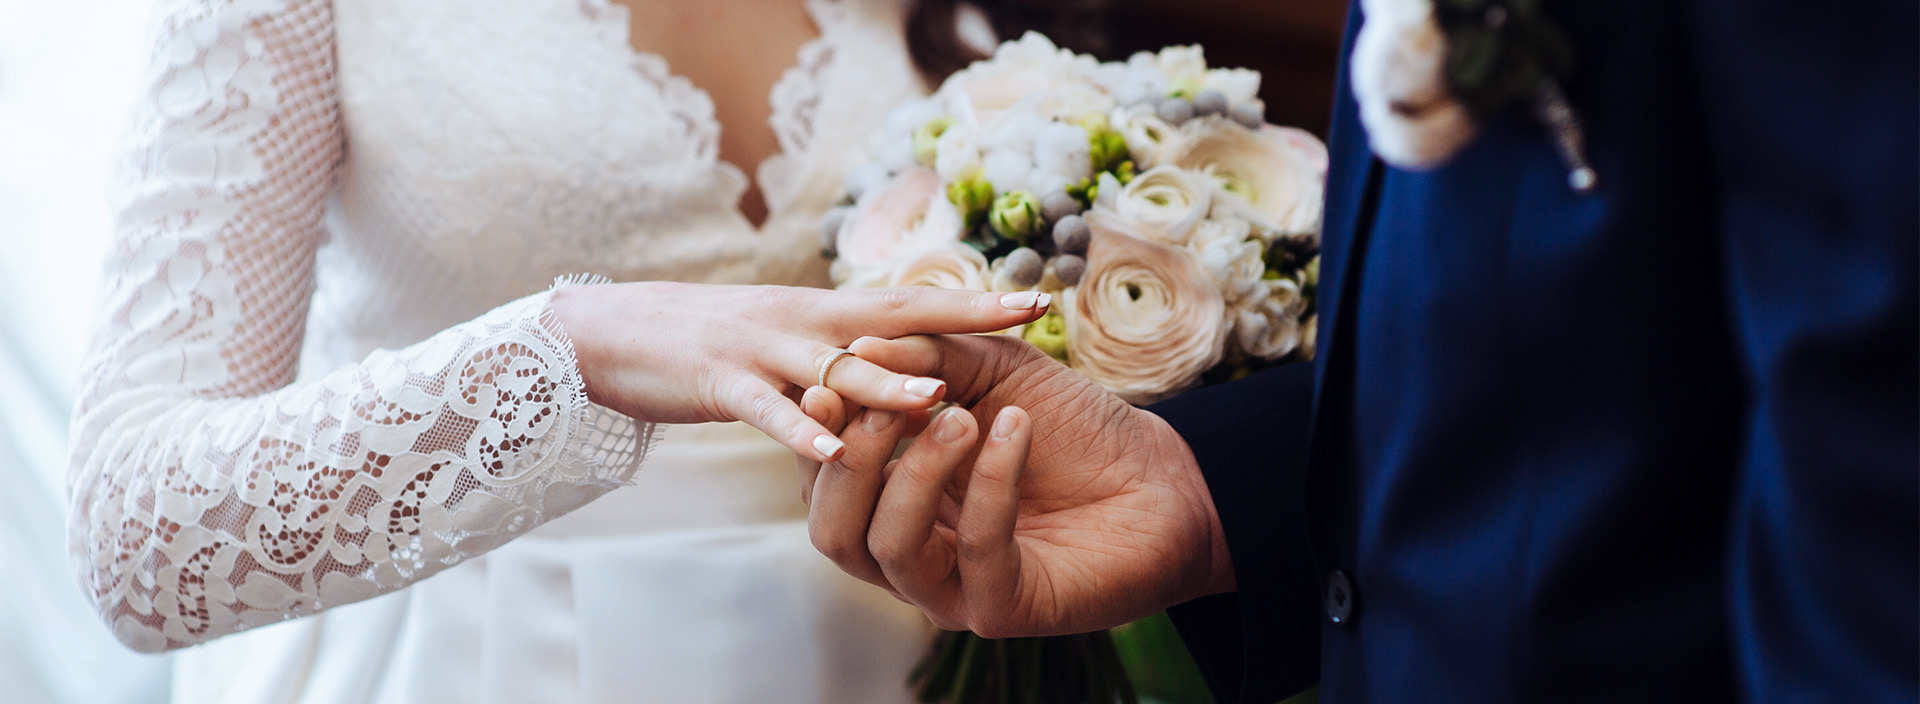 close up of a groom putting a ring on the bride